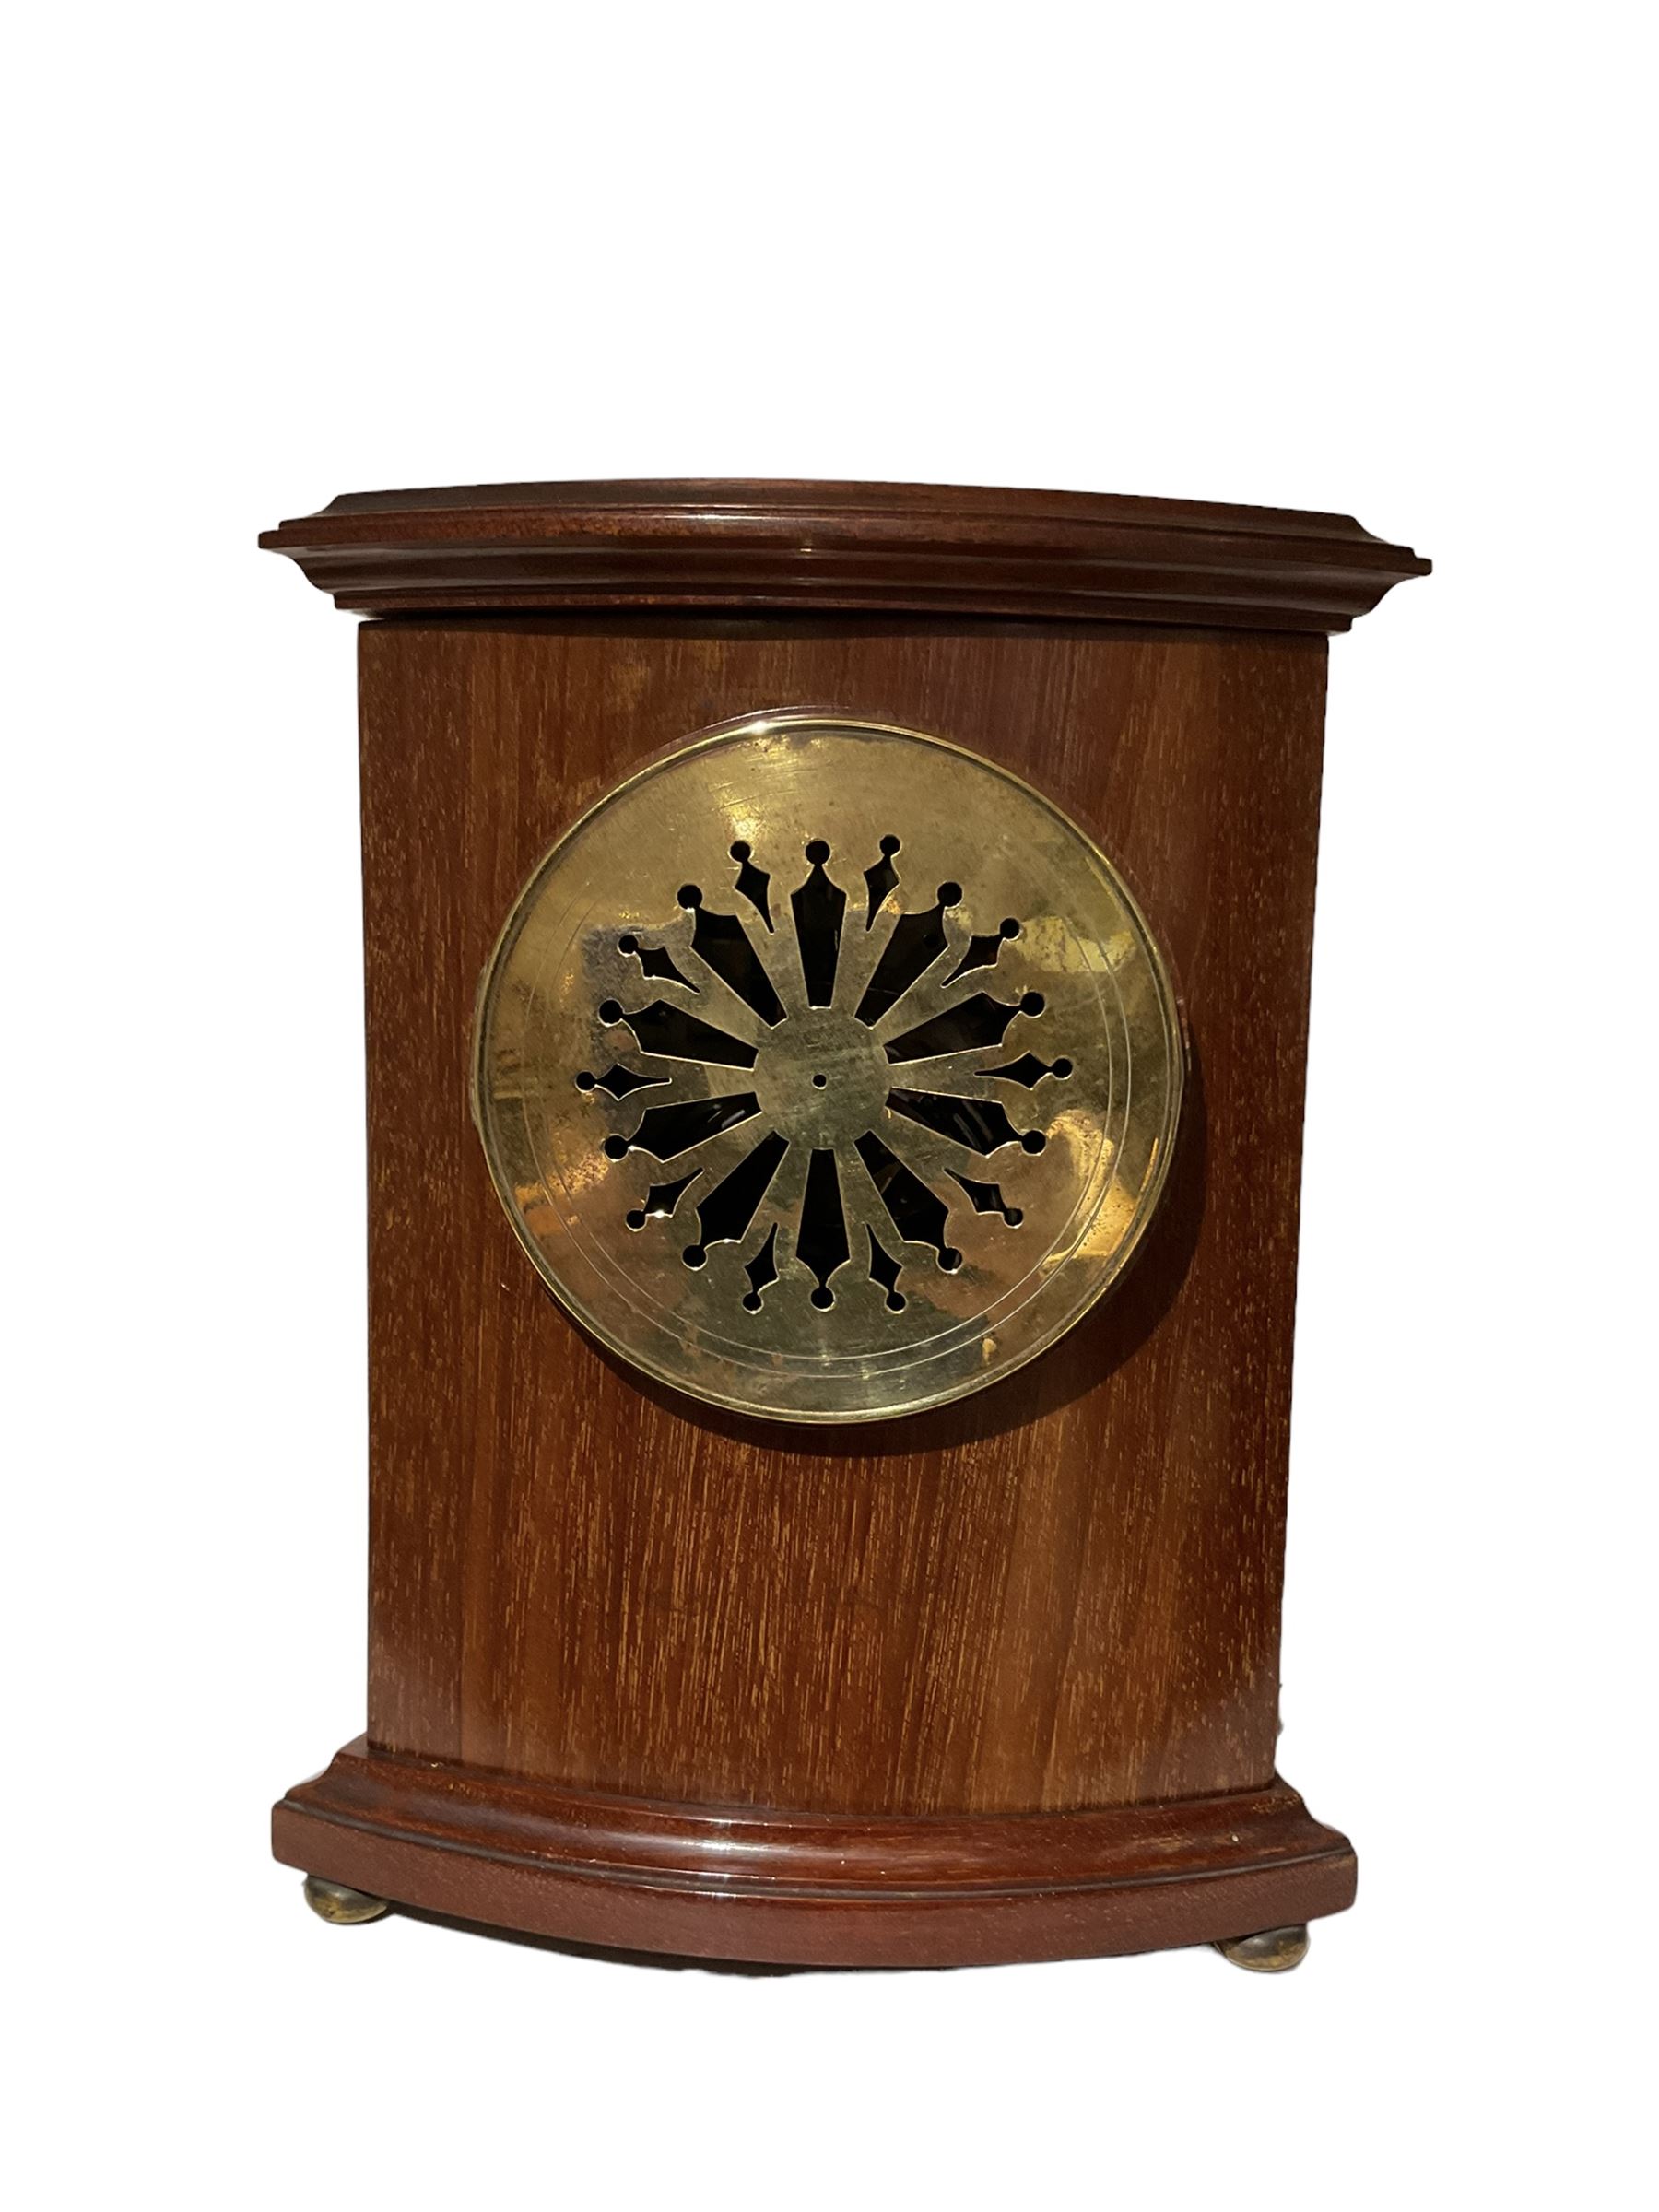 French - Edwardian 8-day mahogany mantle clock with inlay - Image 3 of 3